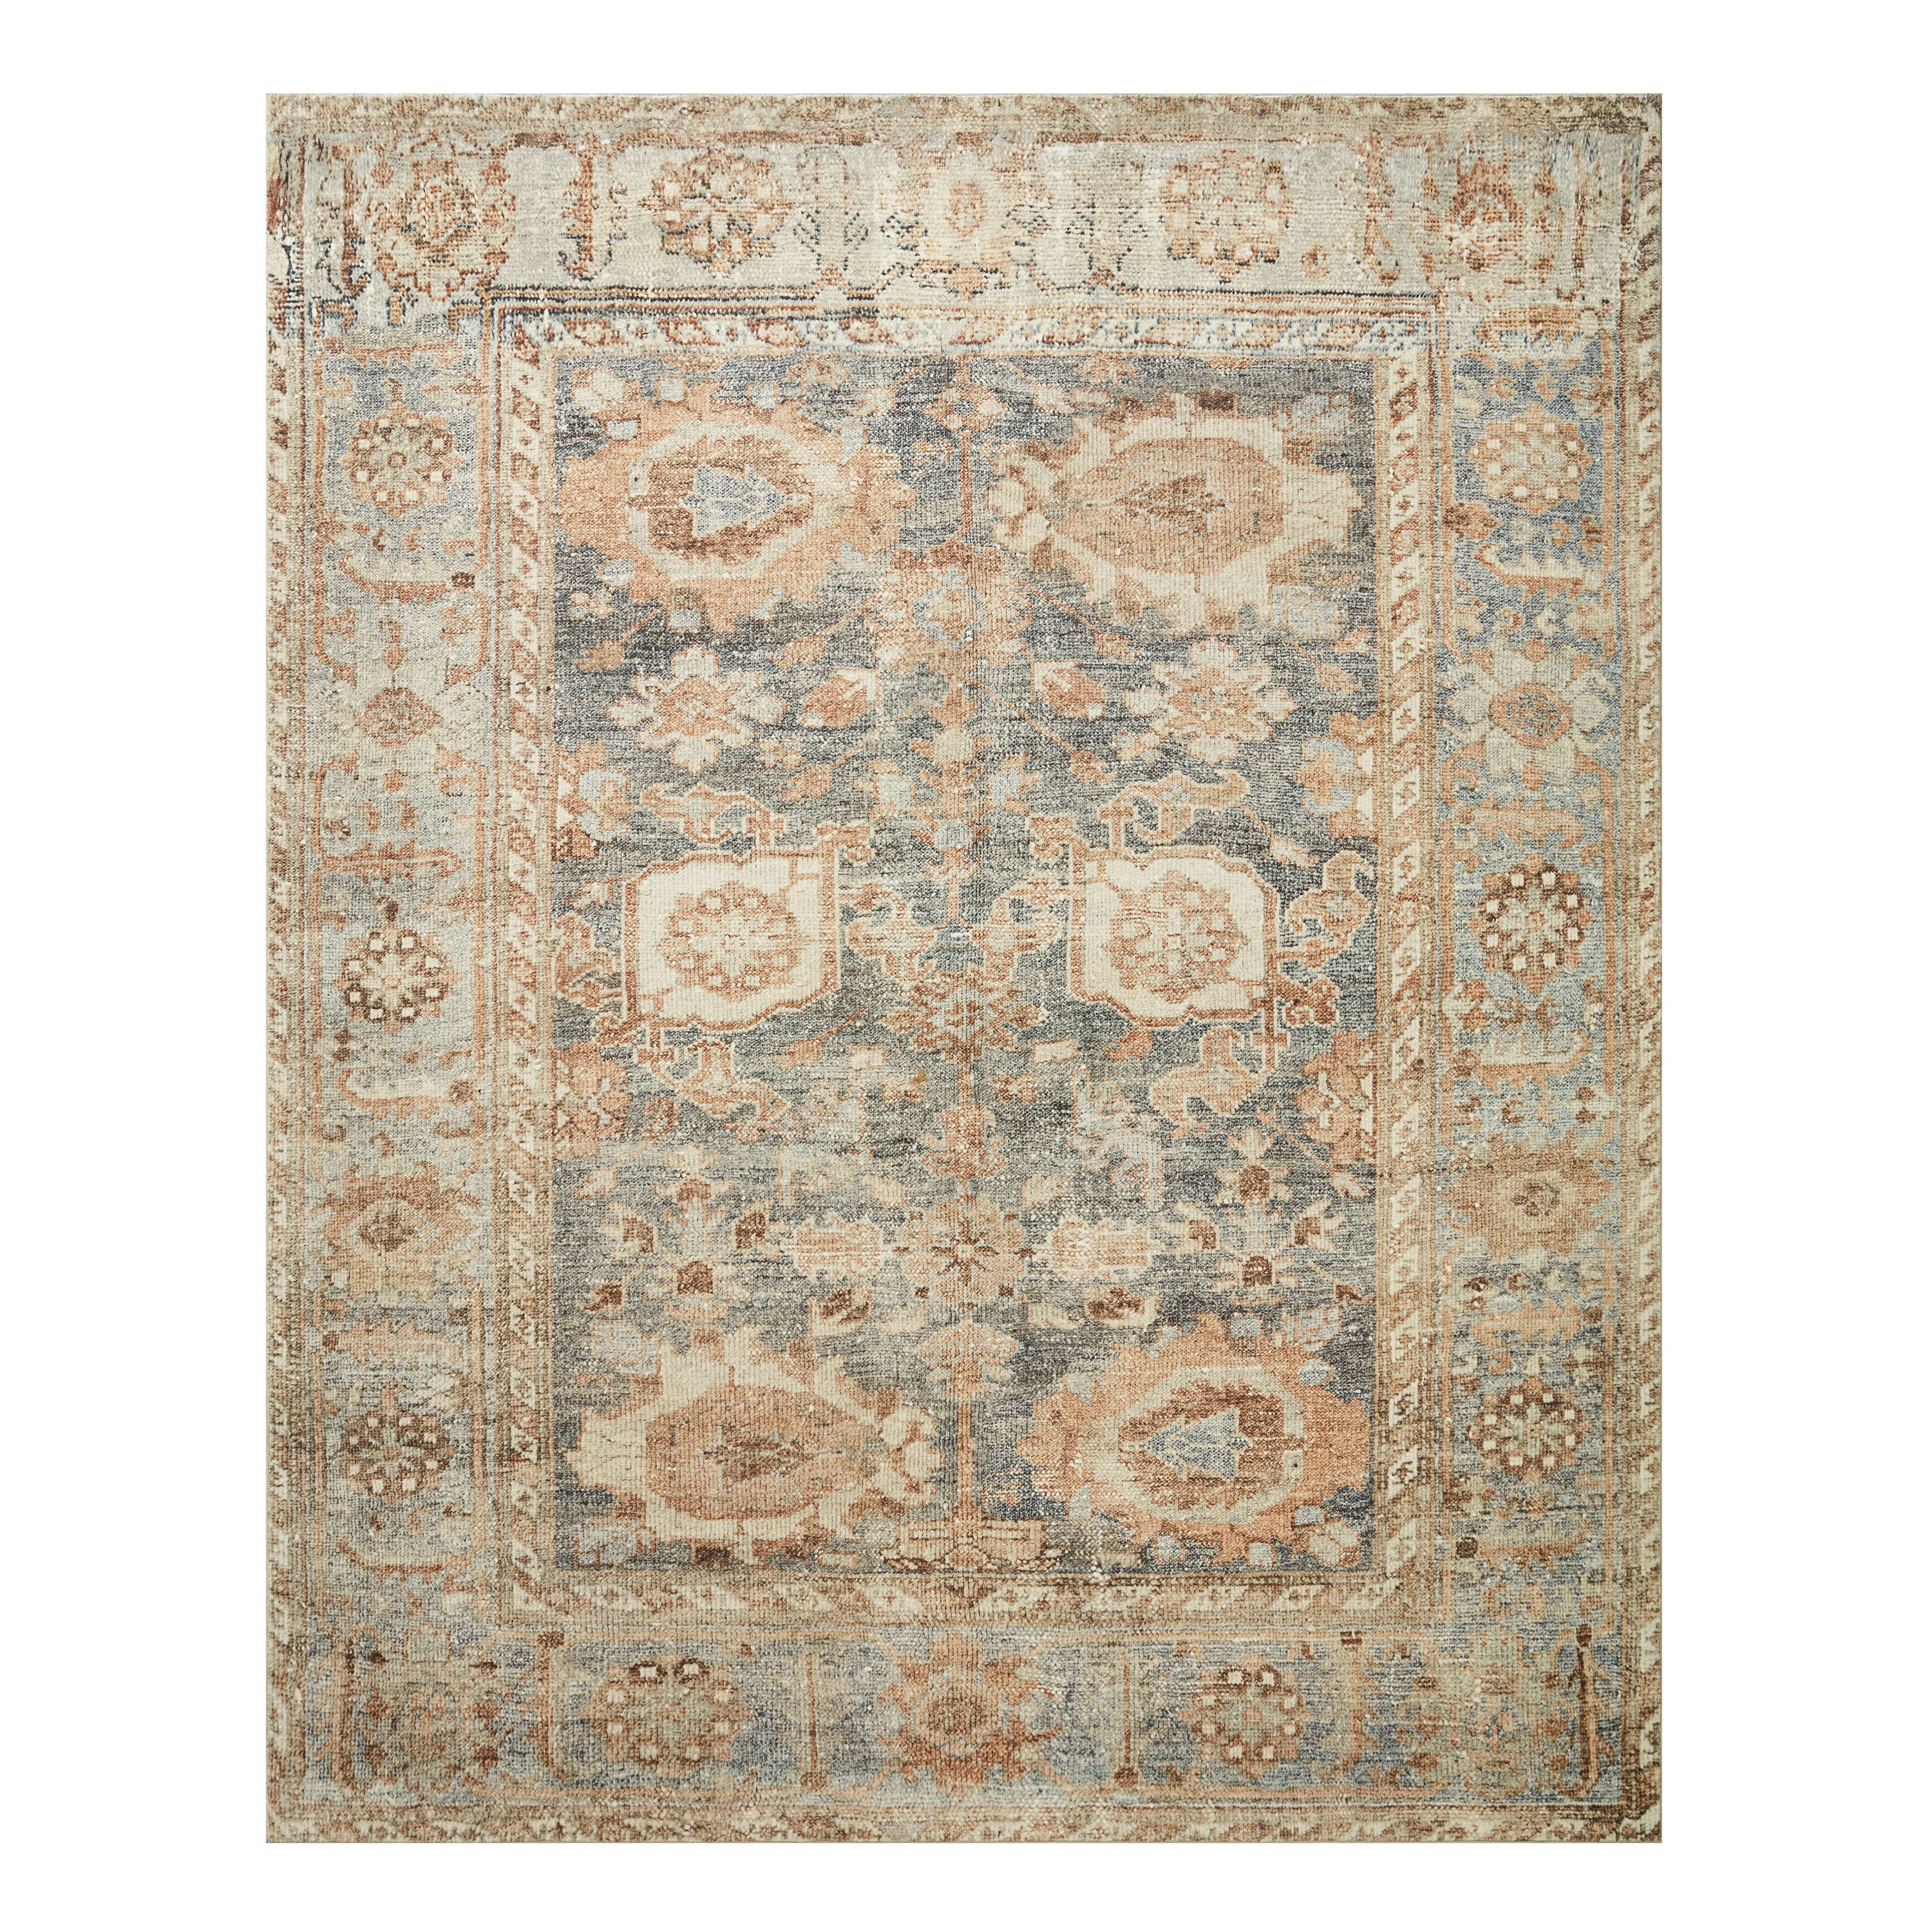 Everly Blue And Tan Persian Style Area Rug | World Market